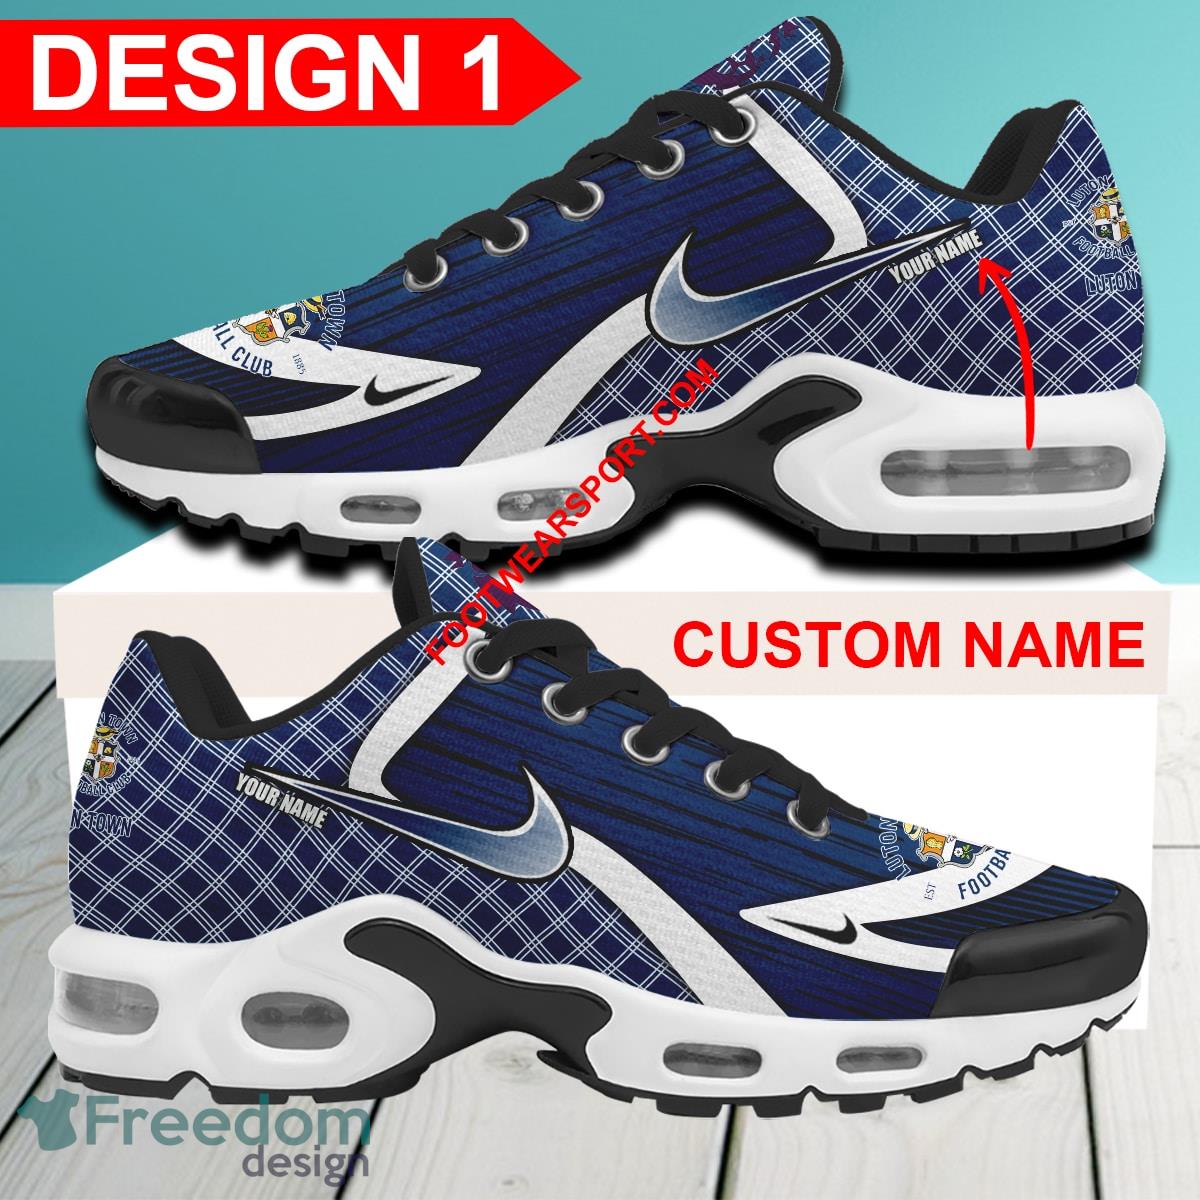 Custom Name EPL Luton Town Air Cushion Sport Shoes TN Sneakers Gift Sneakers Fans - EPL Luton Town Air Cushion Sport Shoes Style 1 TN Sneakers